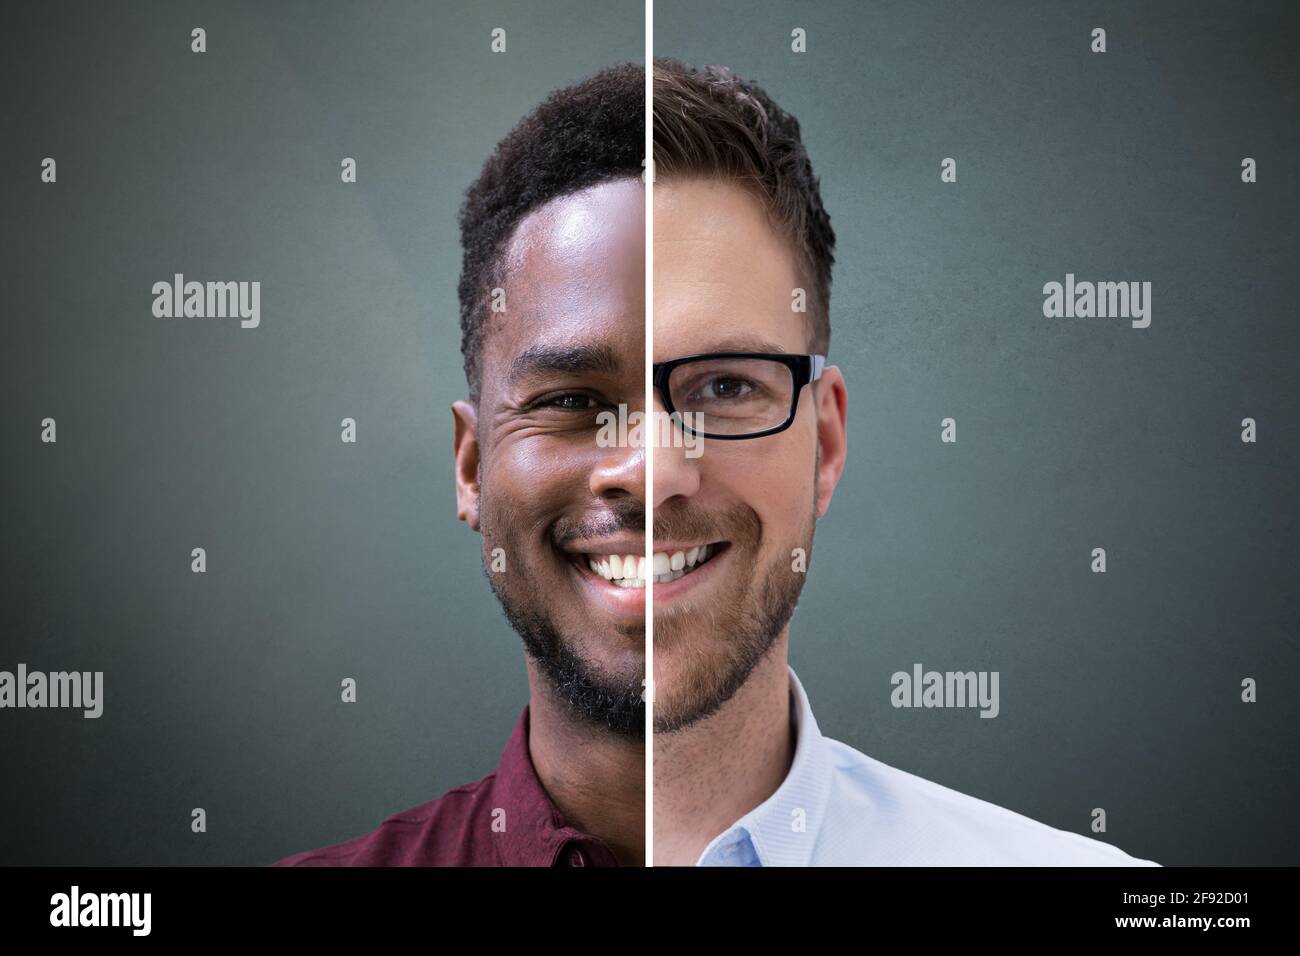 African Ethnicity Equality Male Face. Multi-Ethic Adult Stock Photo